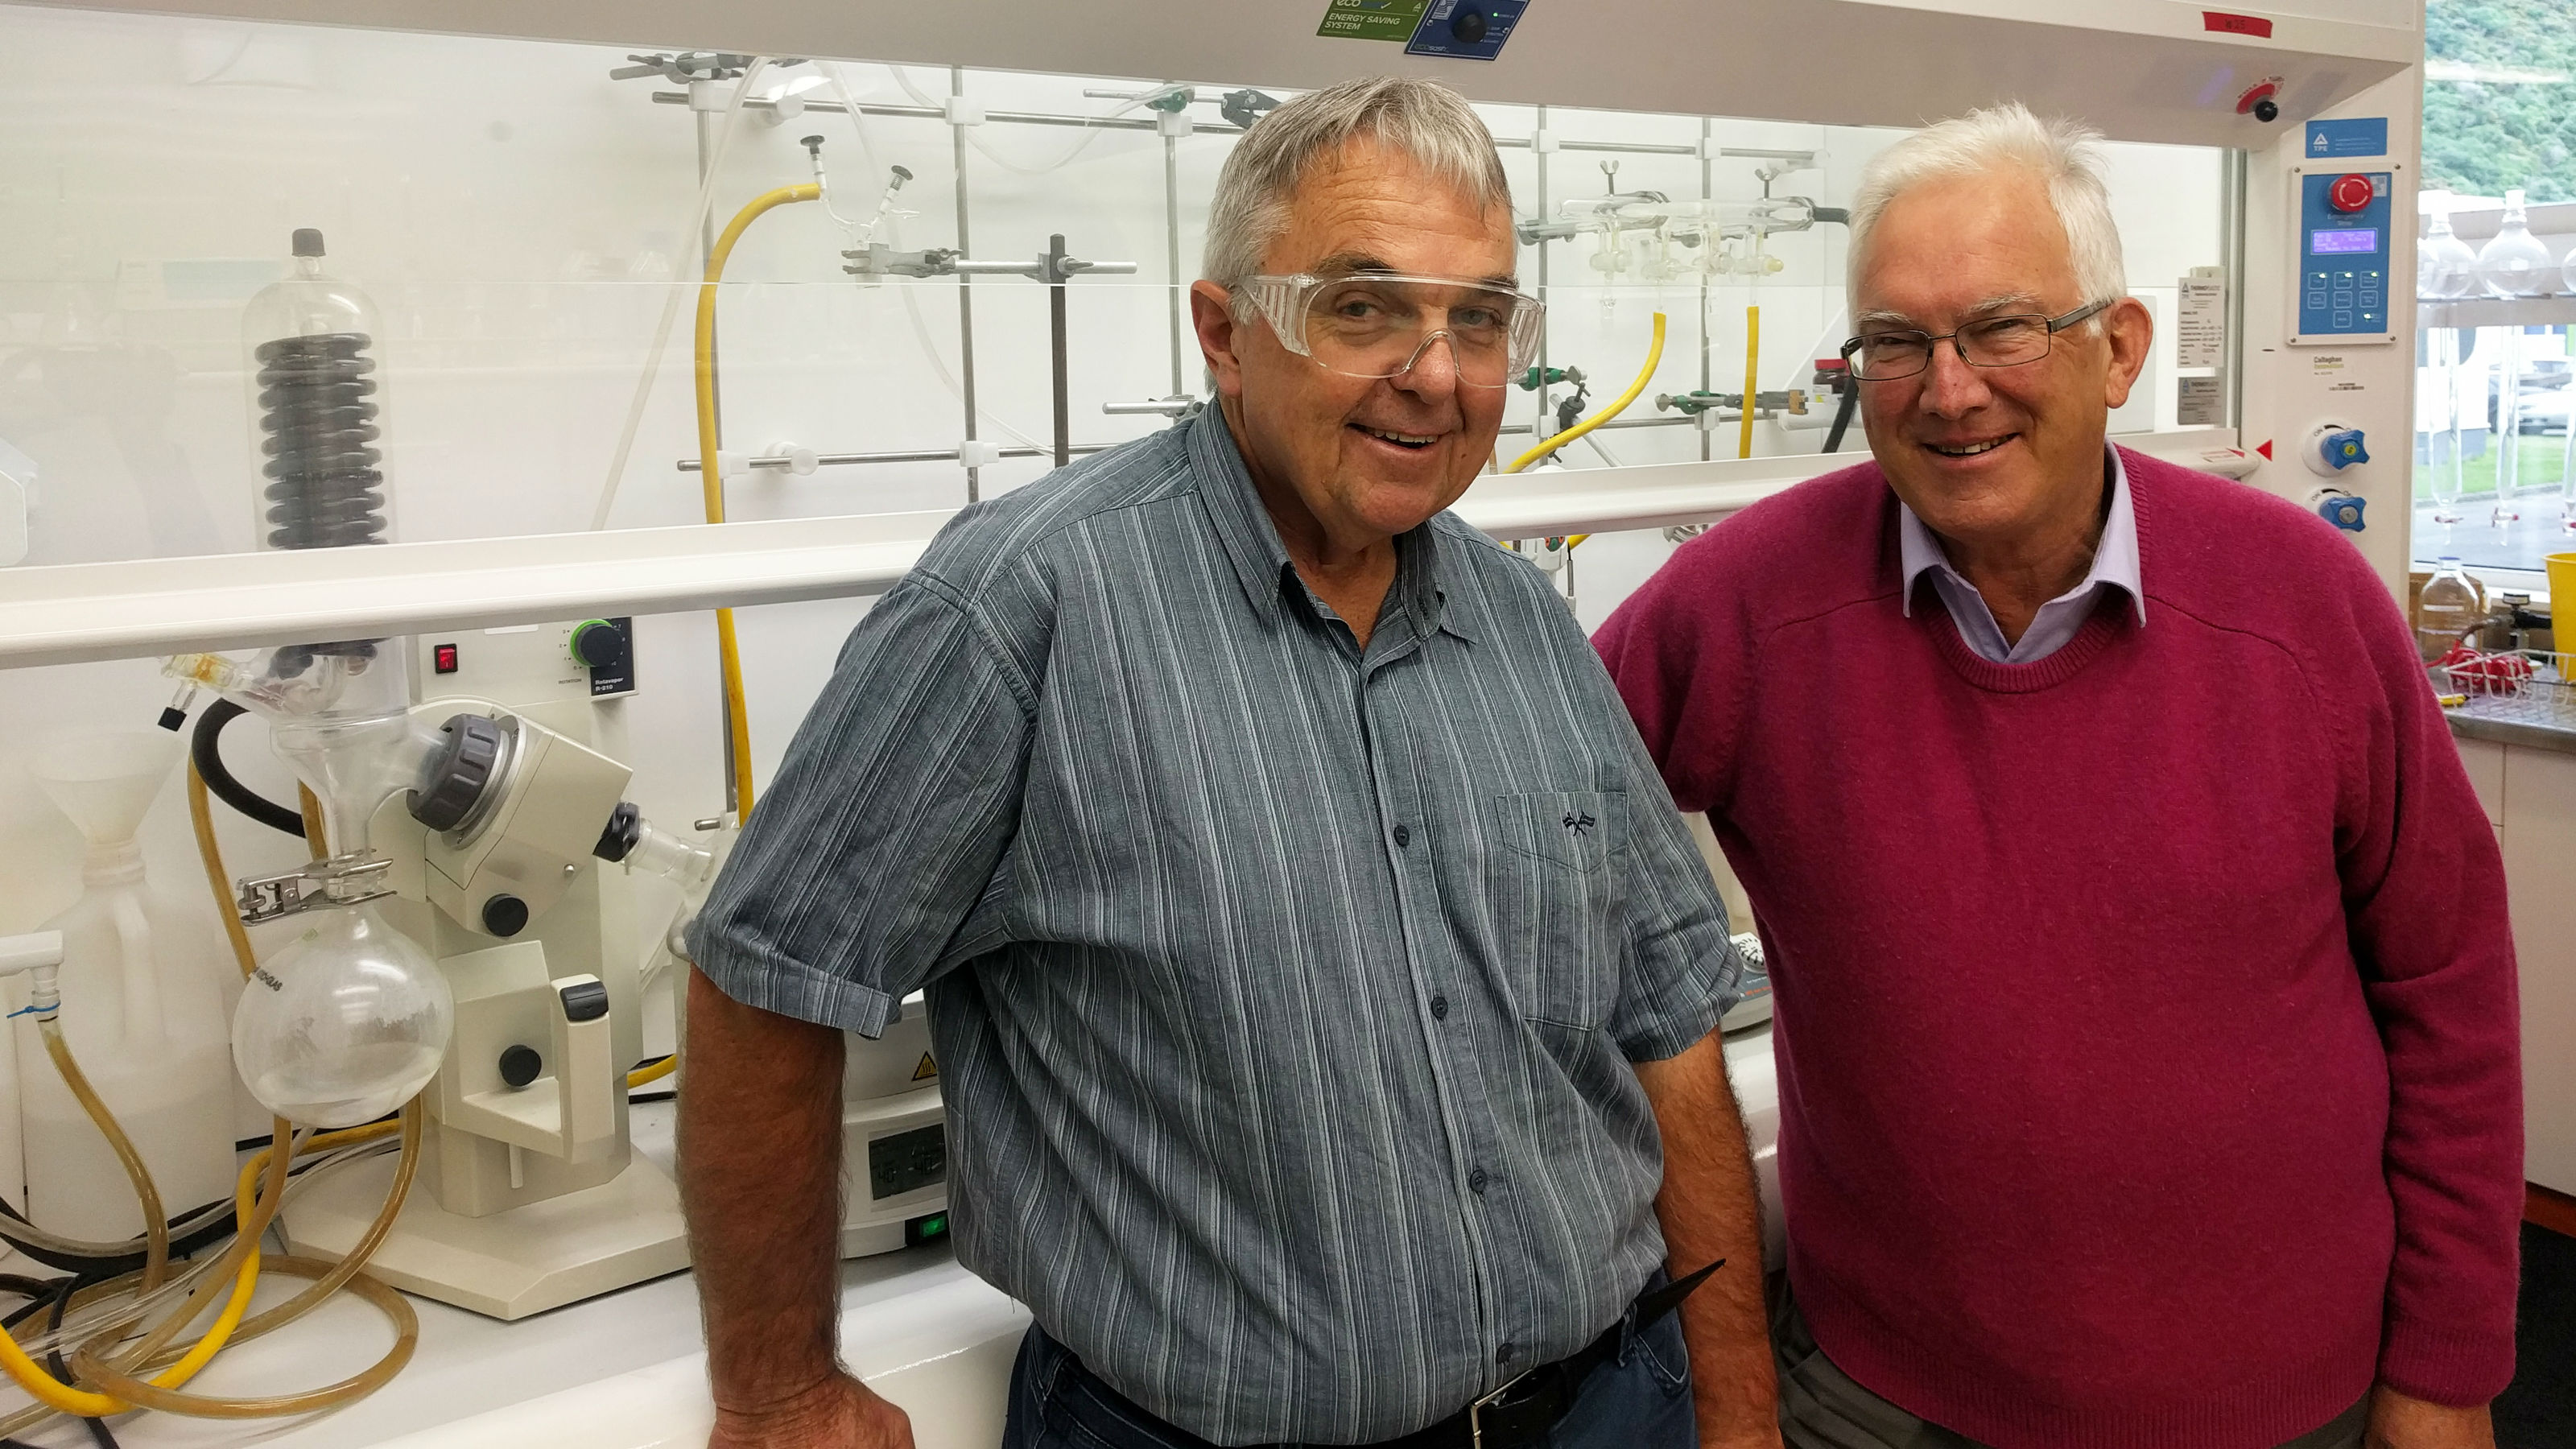 Peter Tyler standing next to Richard Furneaux in Ferrier lab